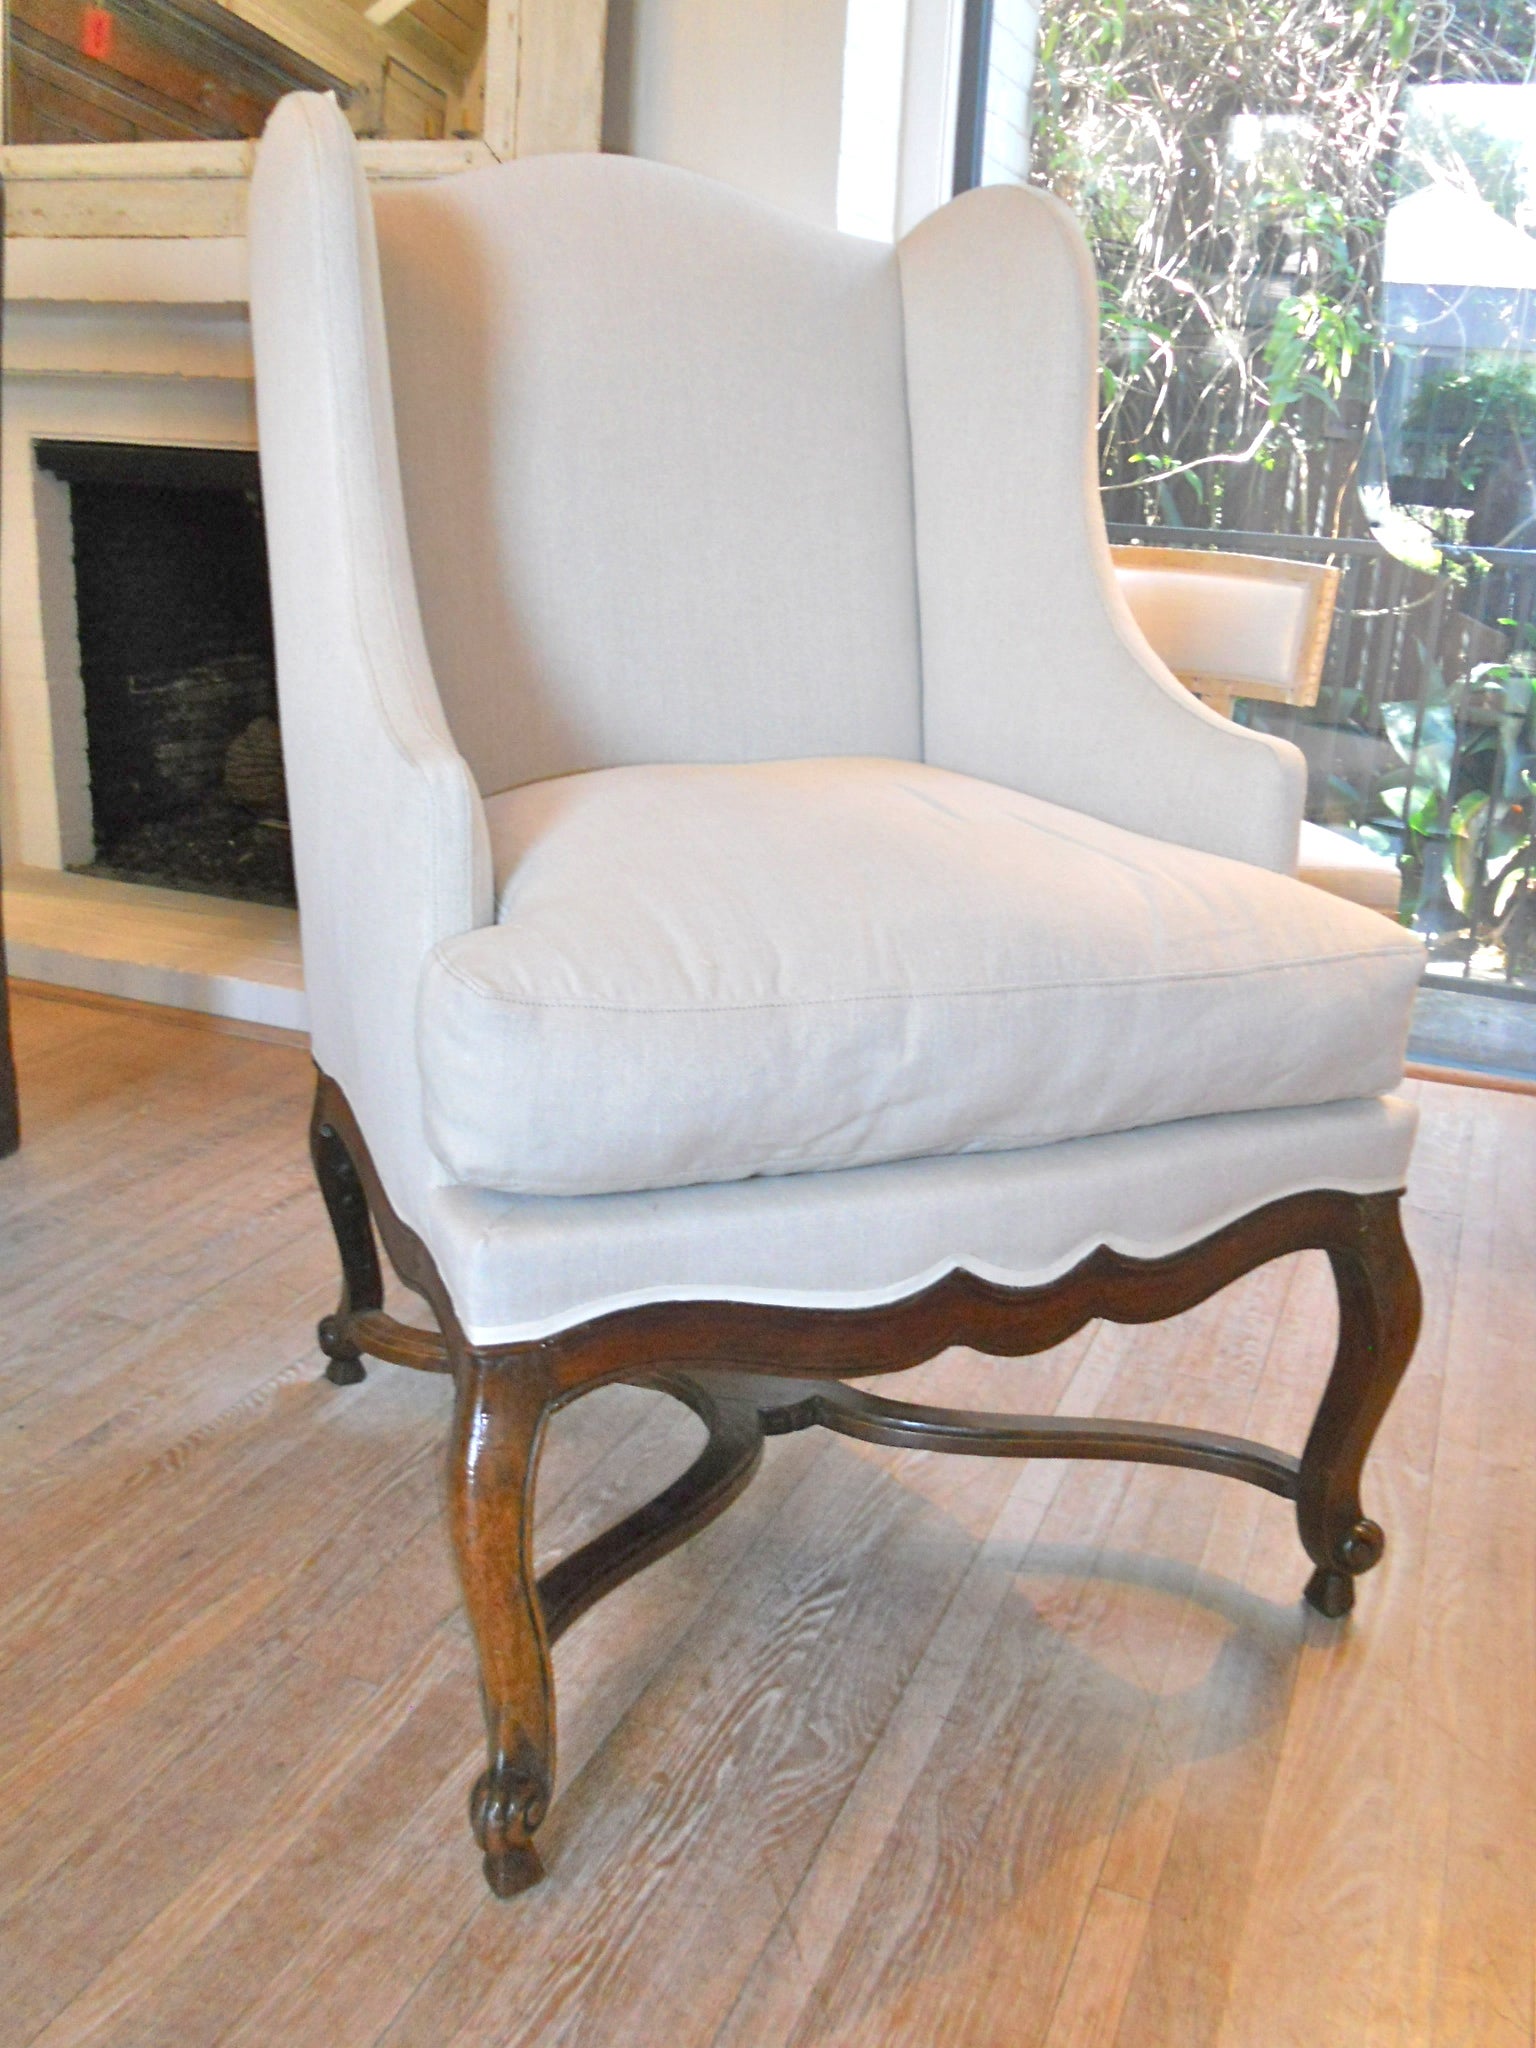 18th Century Transitional Regence / Louis XV Wing Back Bergere